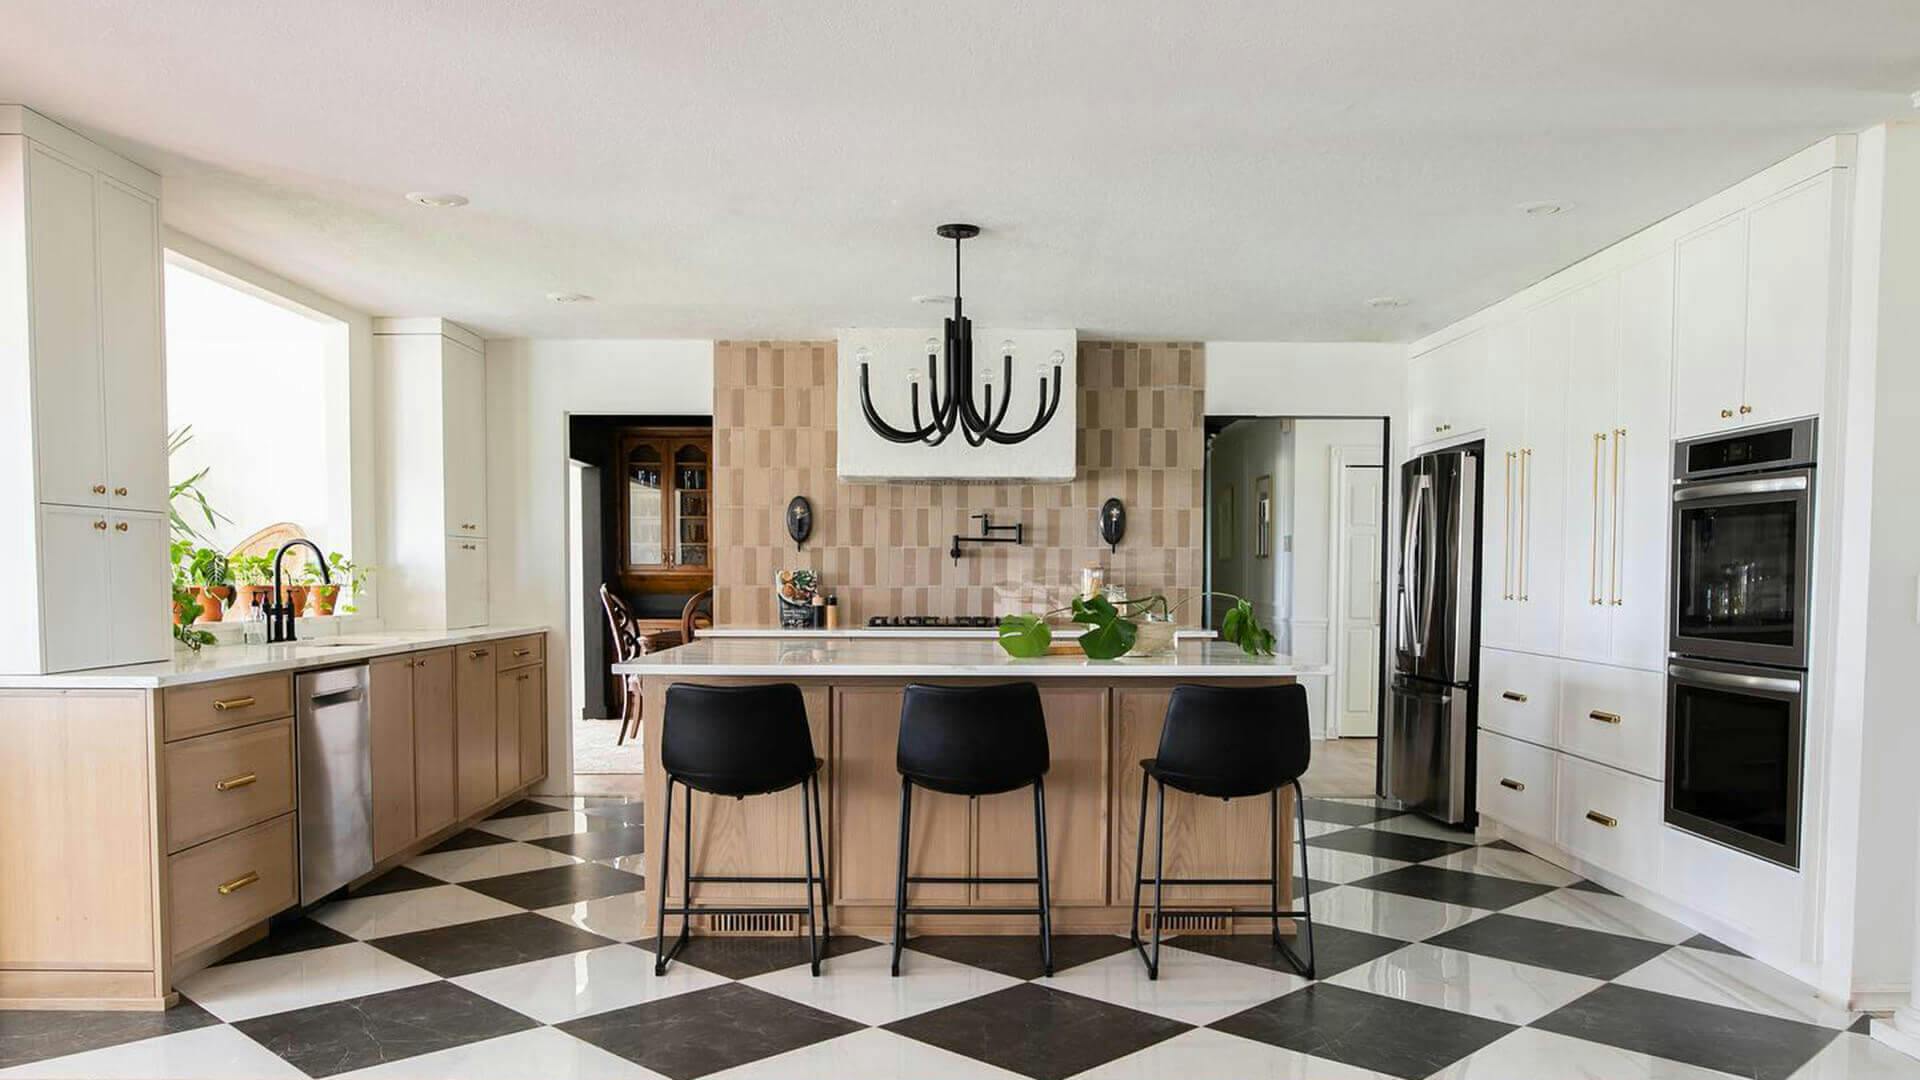 Art deco kitchen with mixed woods and patterns featuring a black odensa chandelier